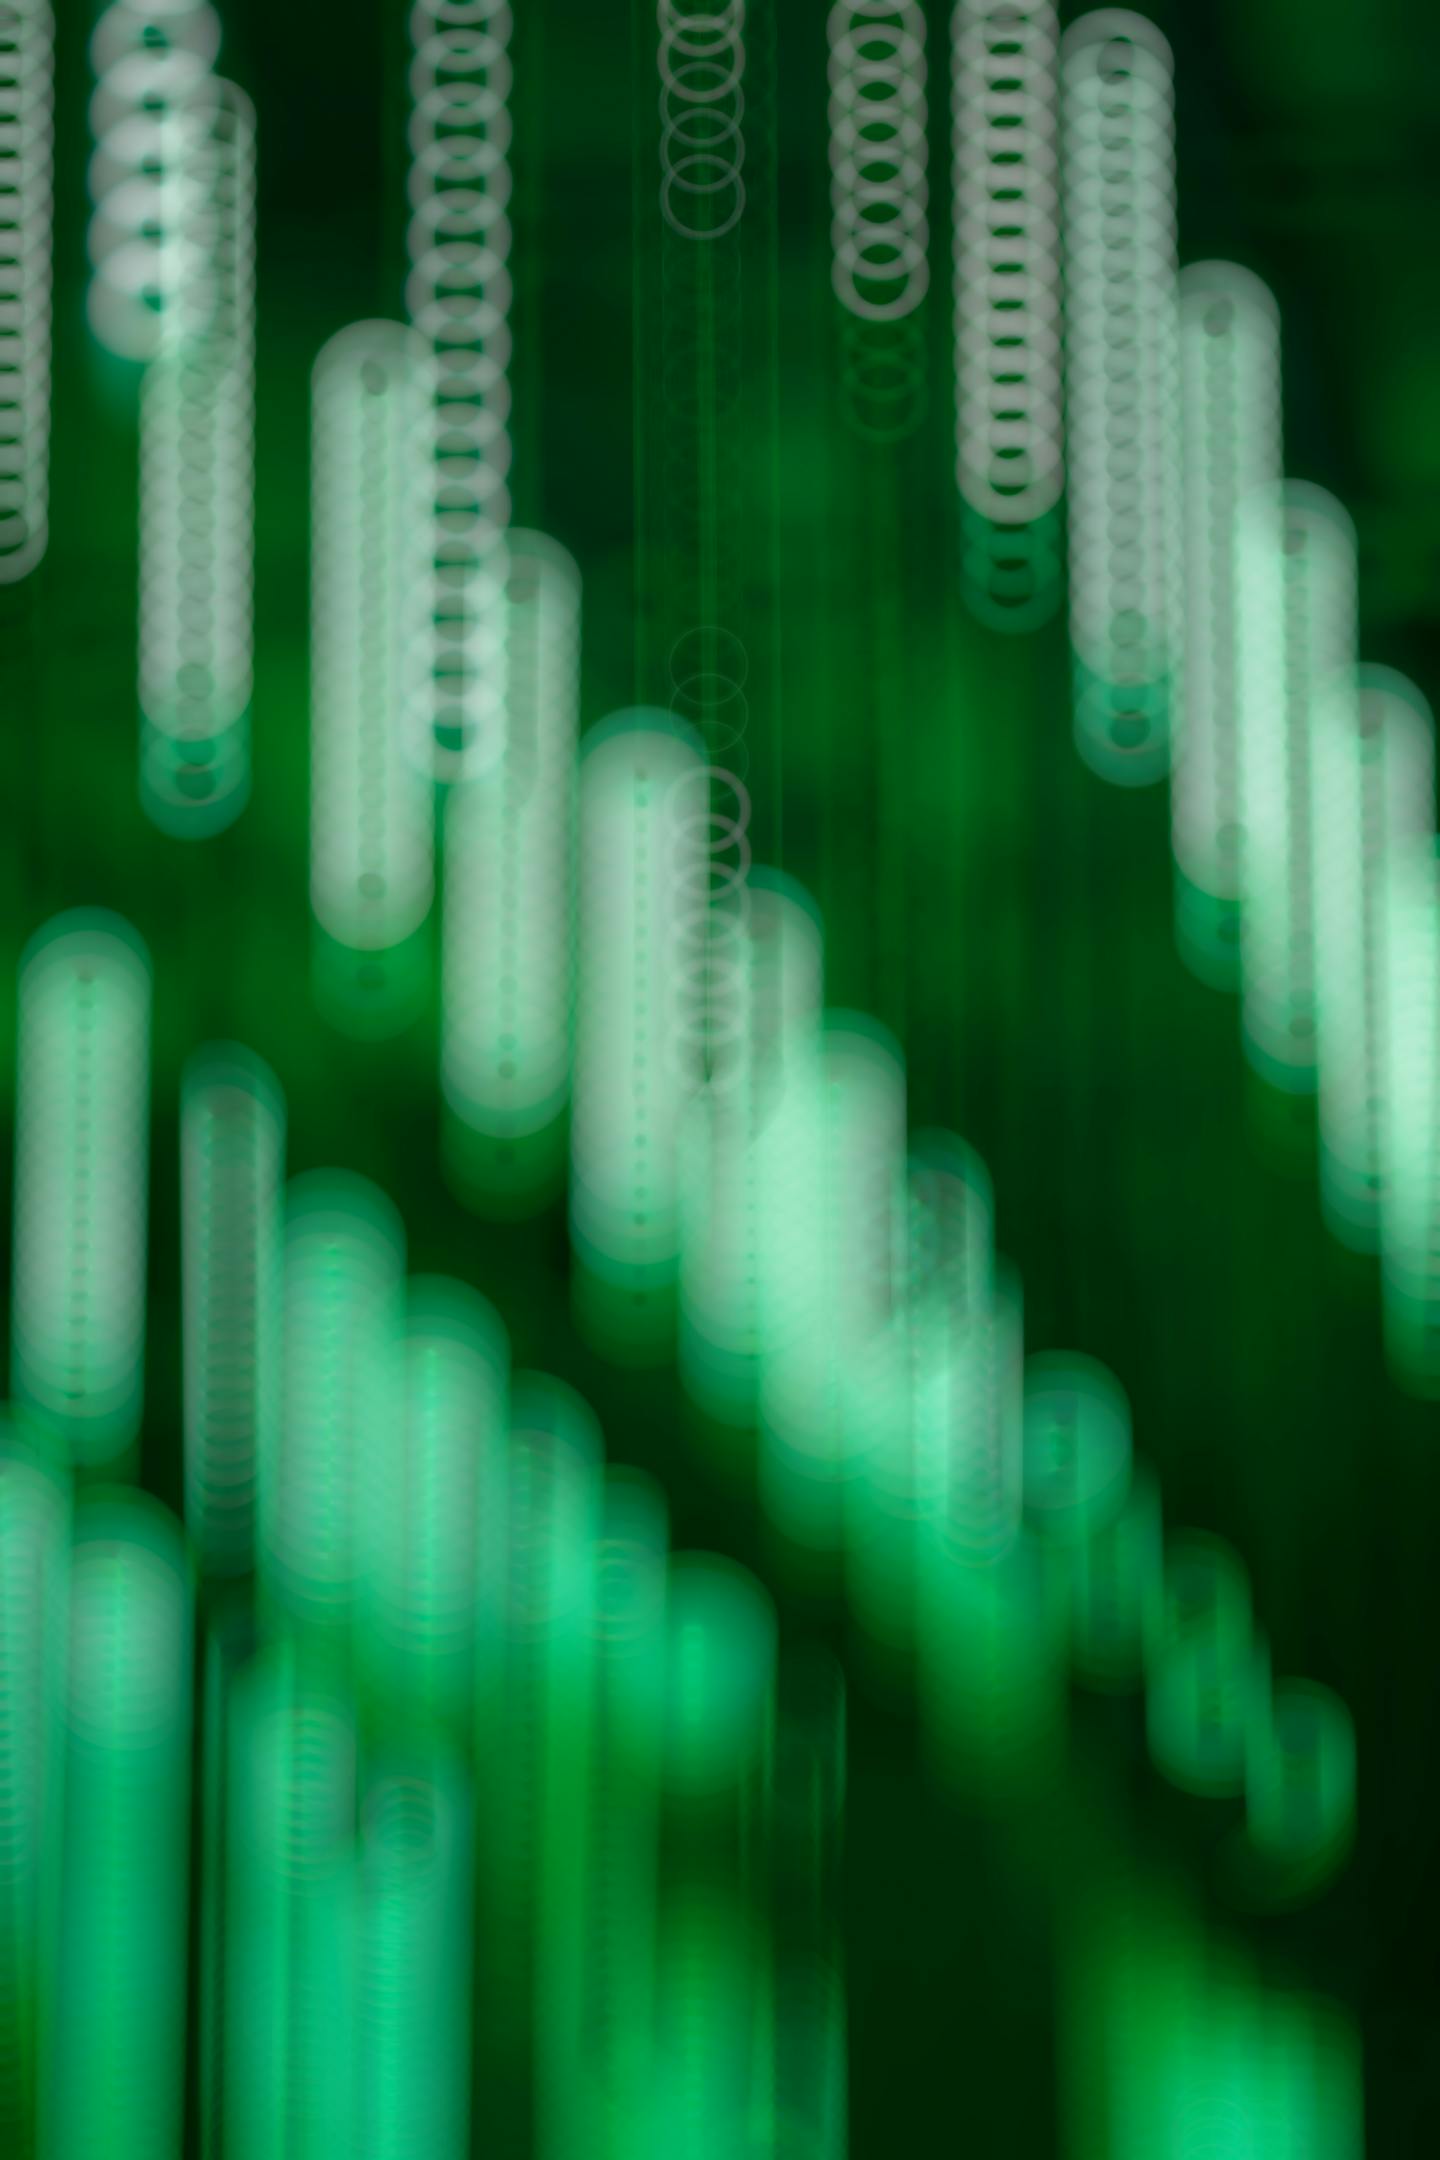 abstract image showing green lights